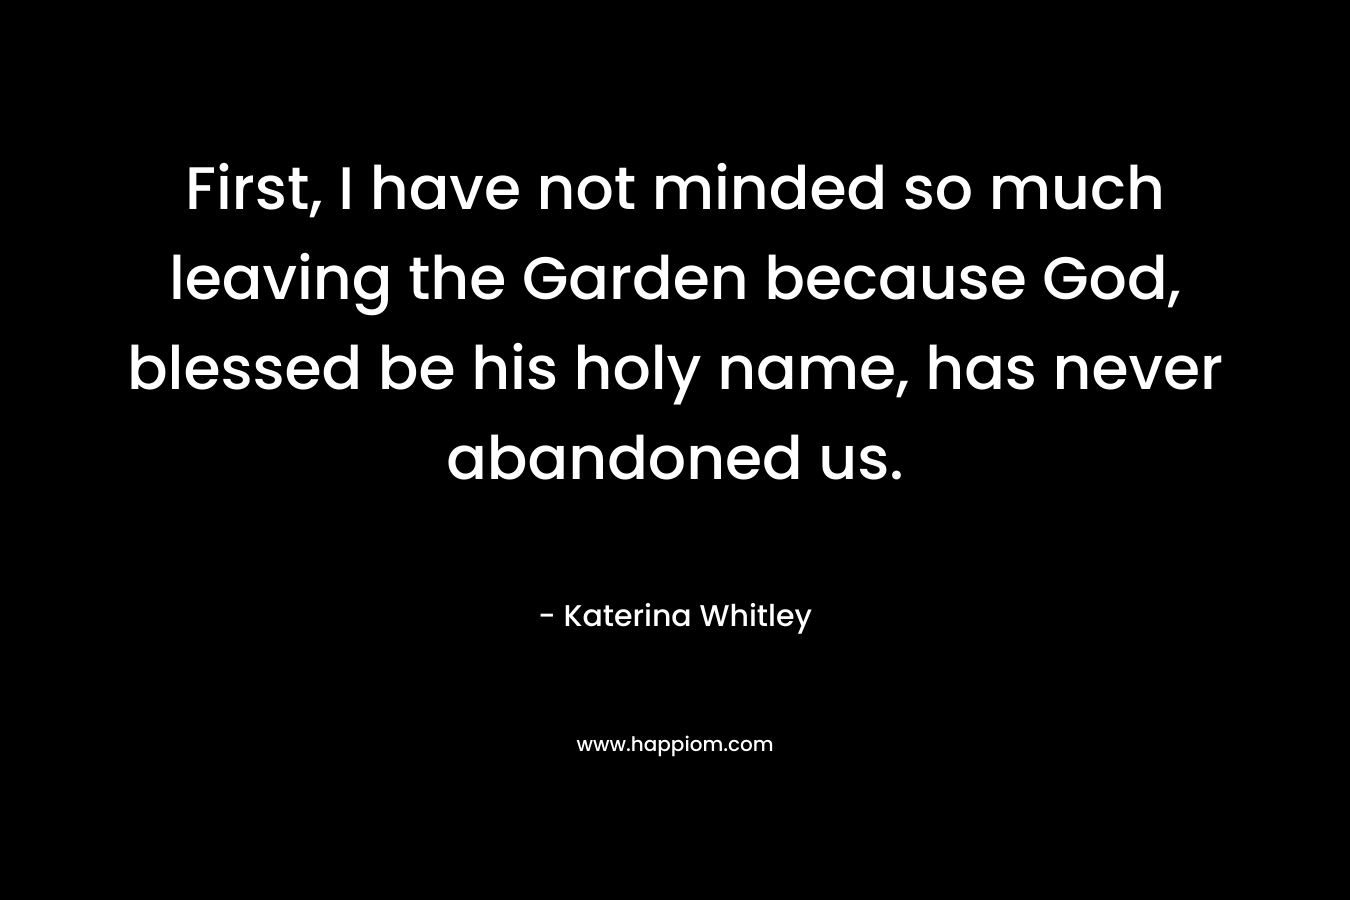 First, I have not minded so much leaving the Garden because God, blessed be his holy name, has never abandoned us.